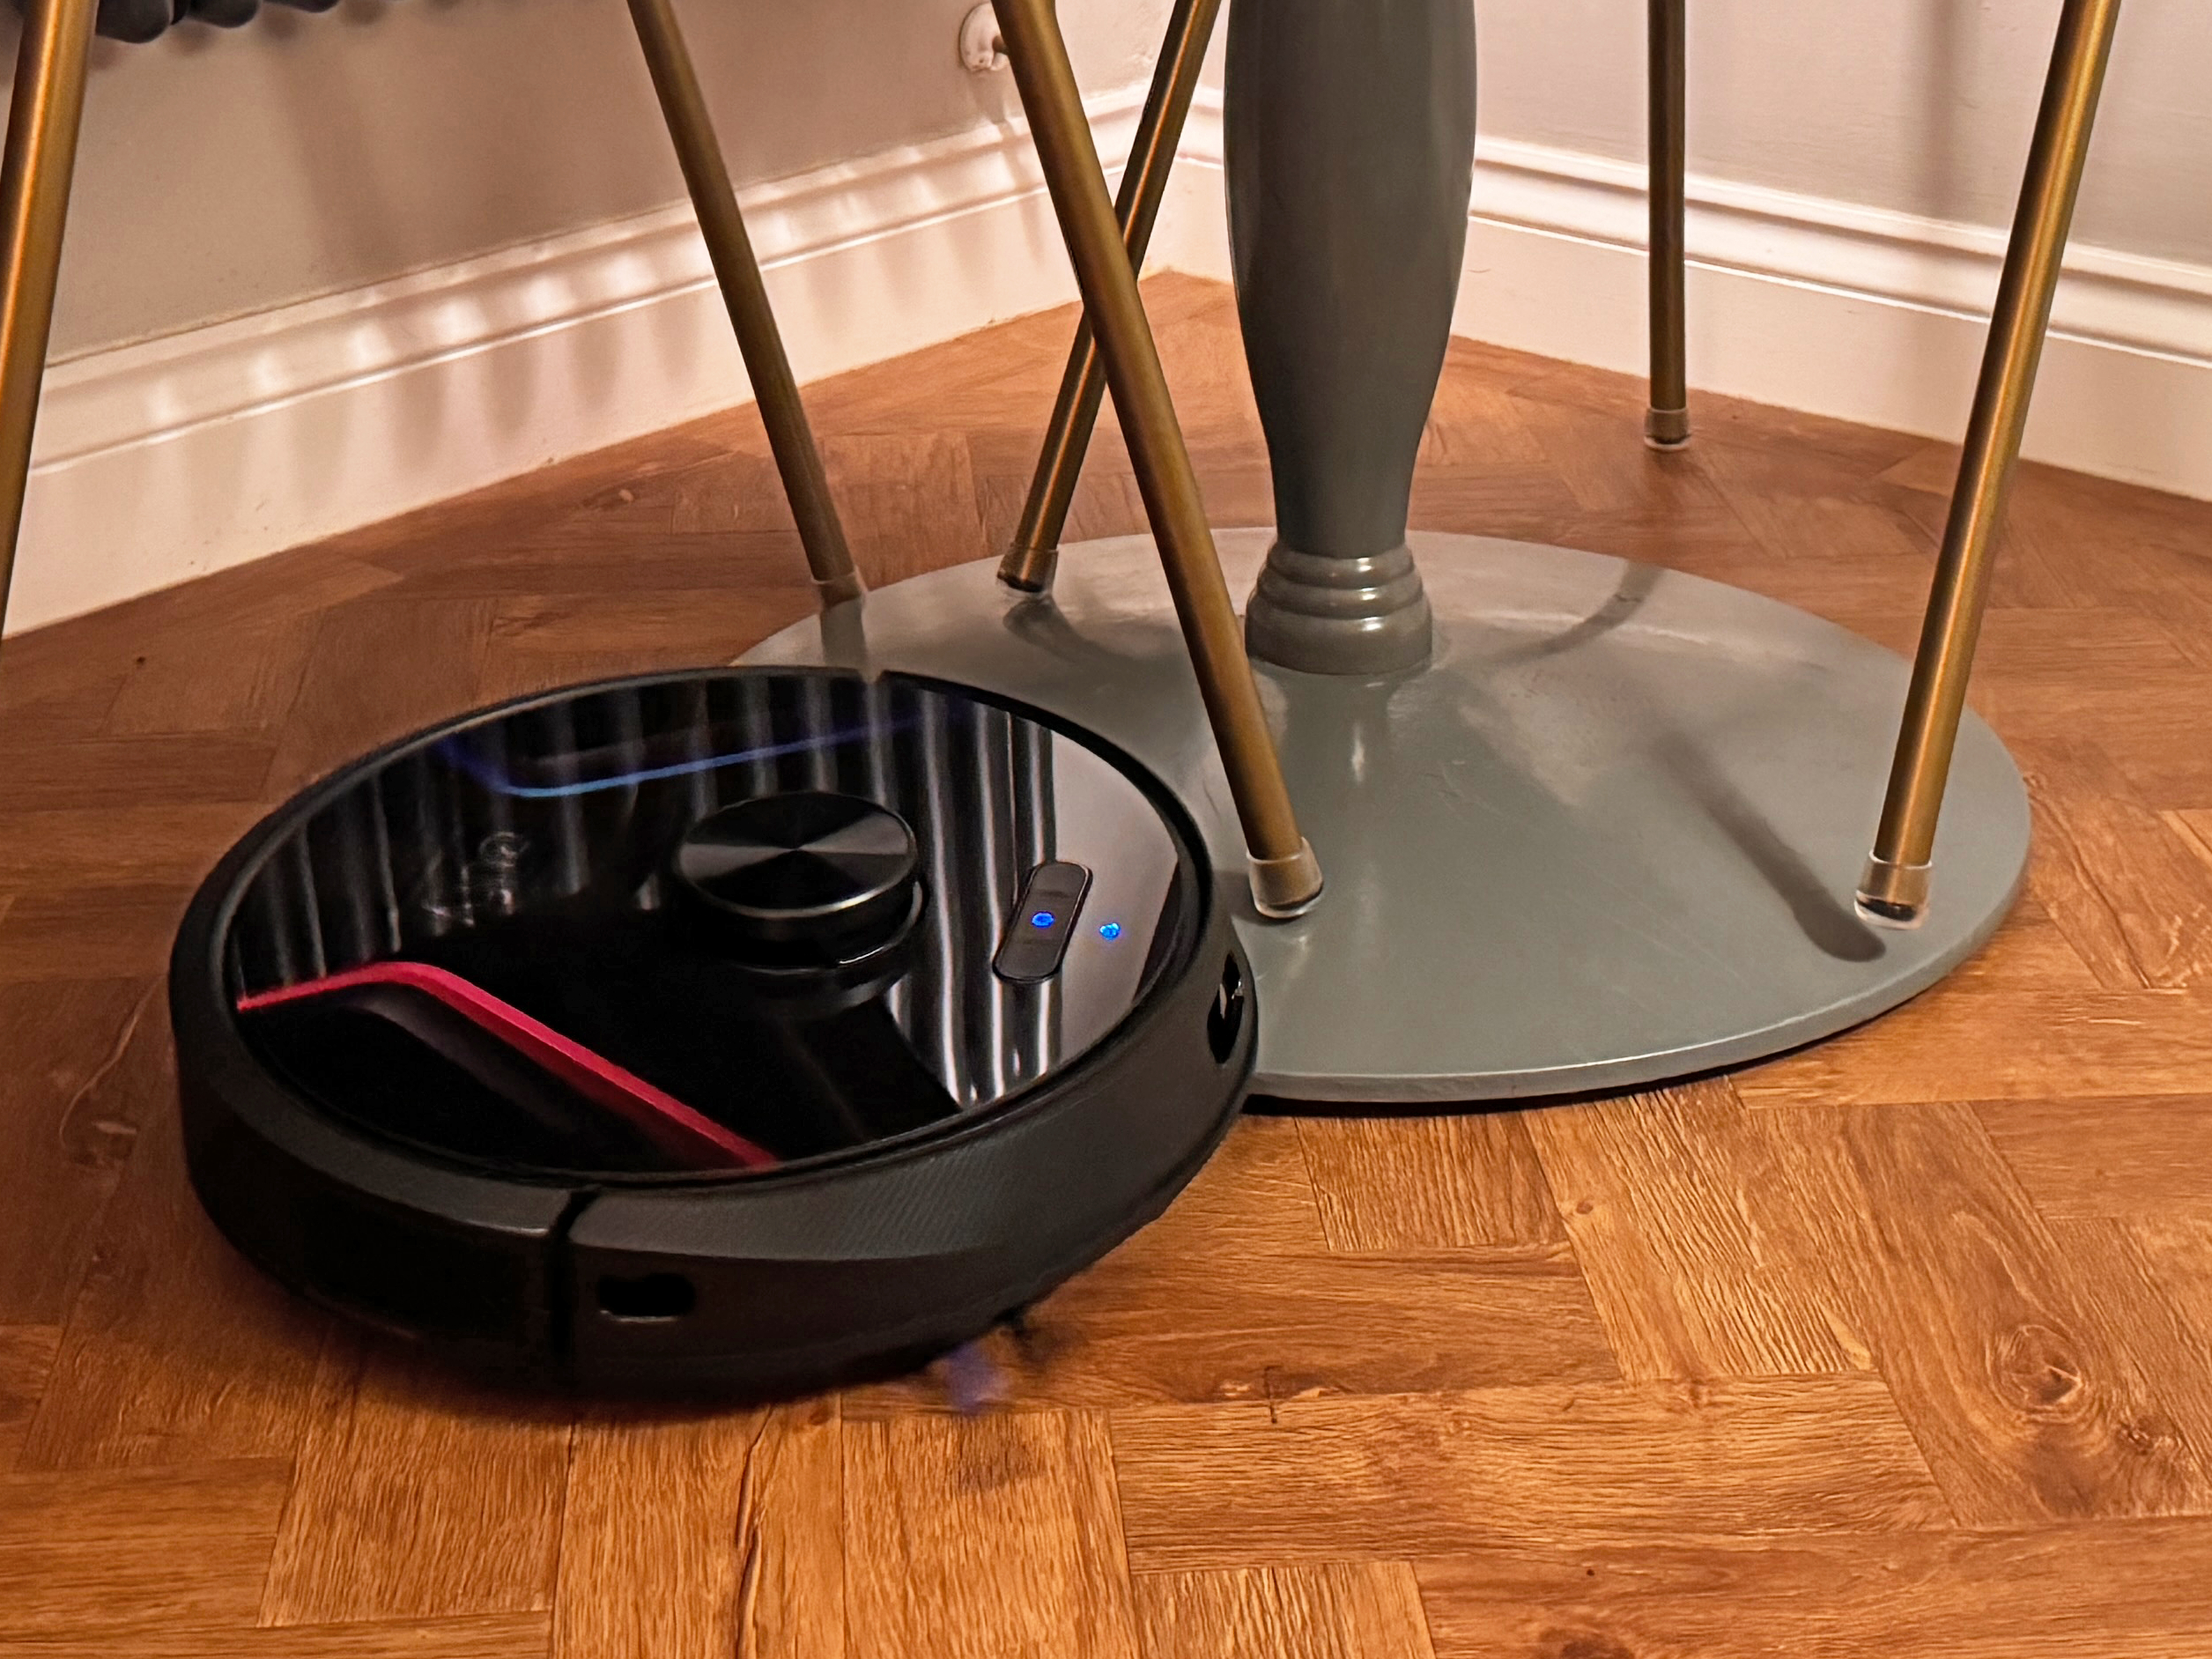 I tested the Eufy Robovac X8 throughout the ground floor of my home